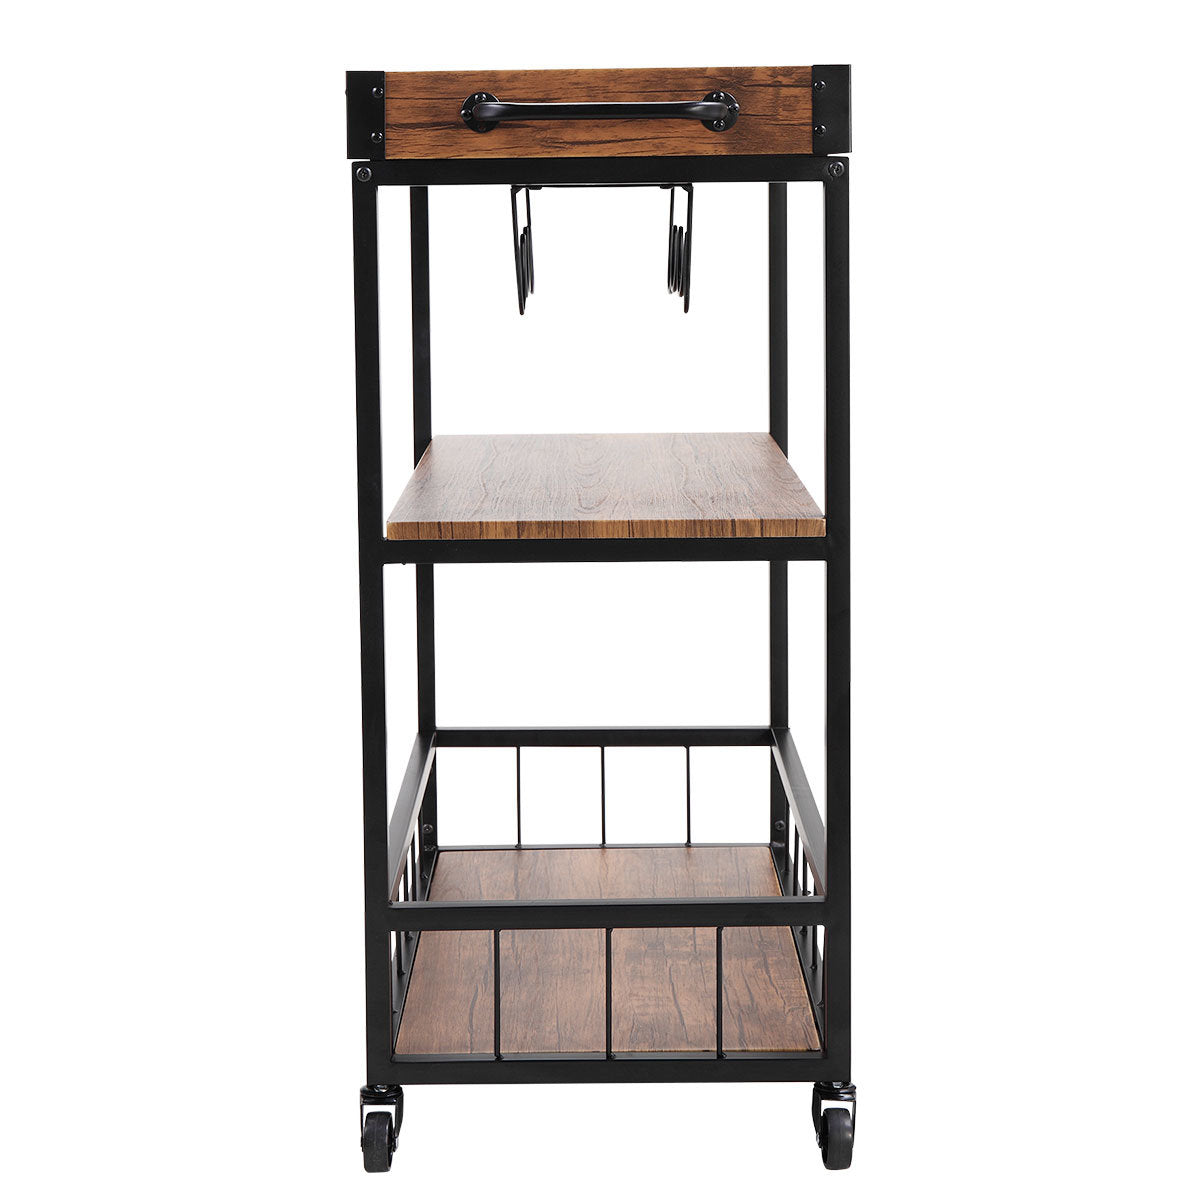 3-Tier Industrial Bar Serving Cart; Mobile Kitchen Storage Cart with Casters and Removable Tray; Wood Metal Serving Trolley for Home Dining Room; Brown and Black